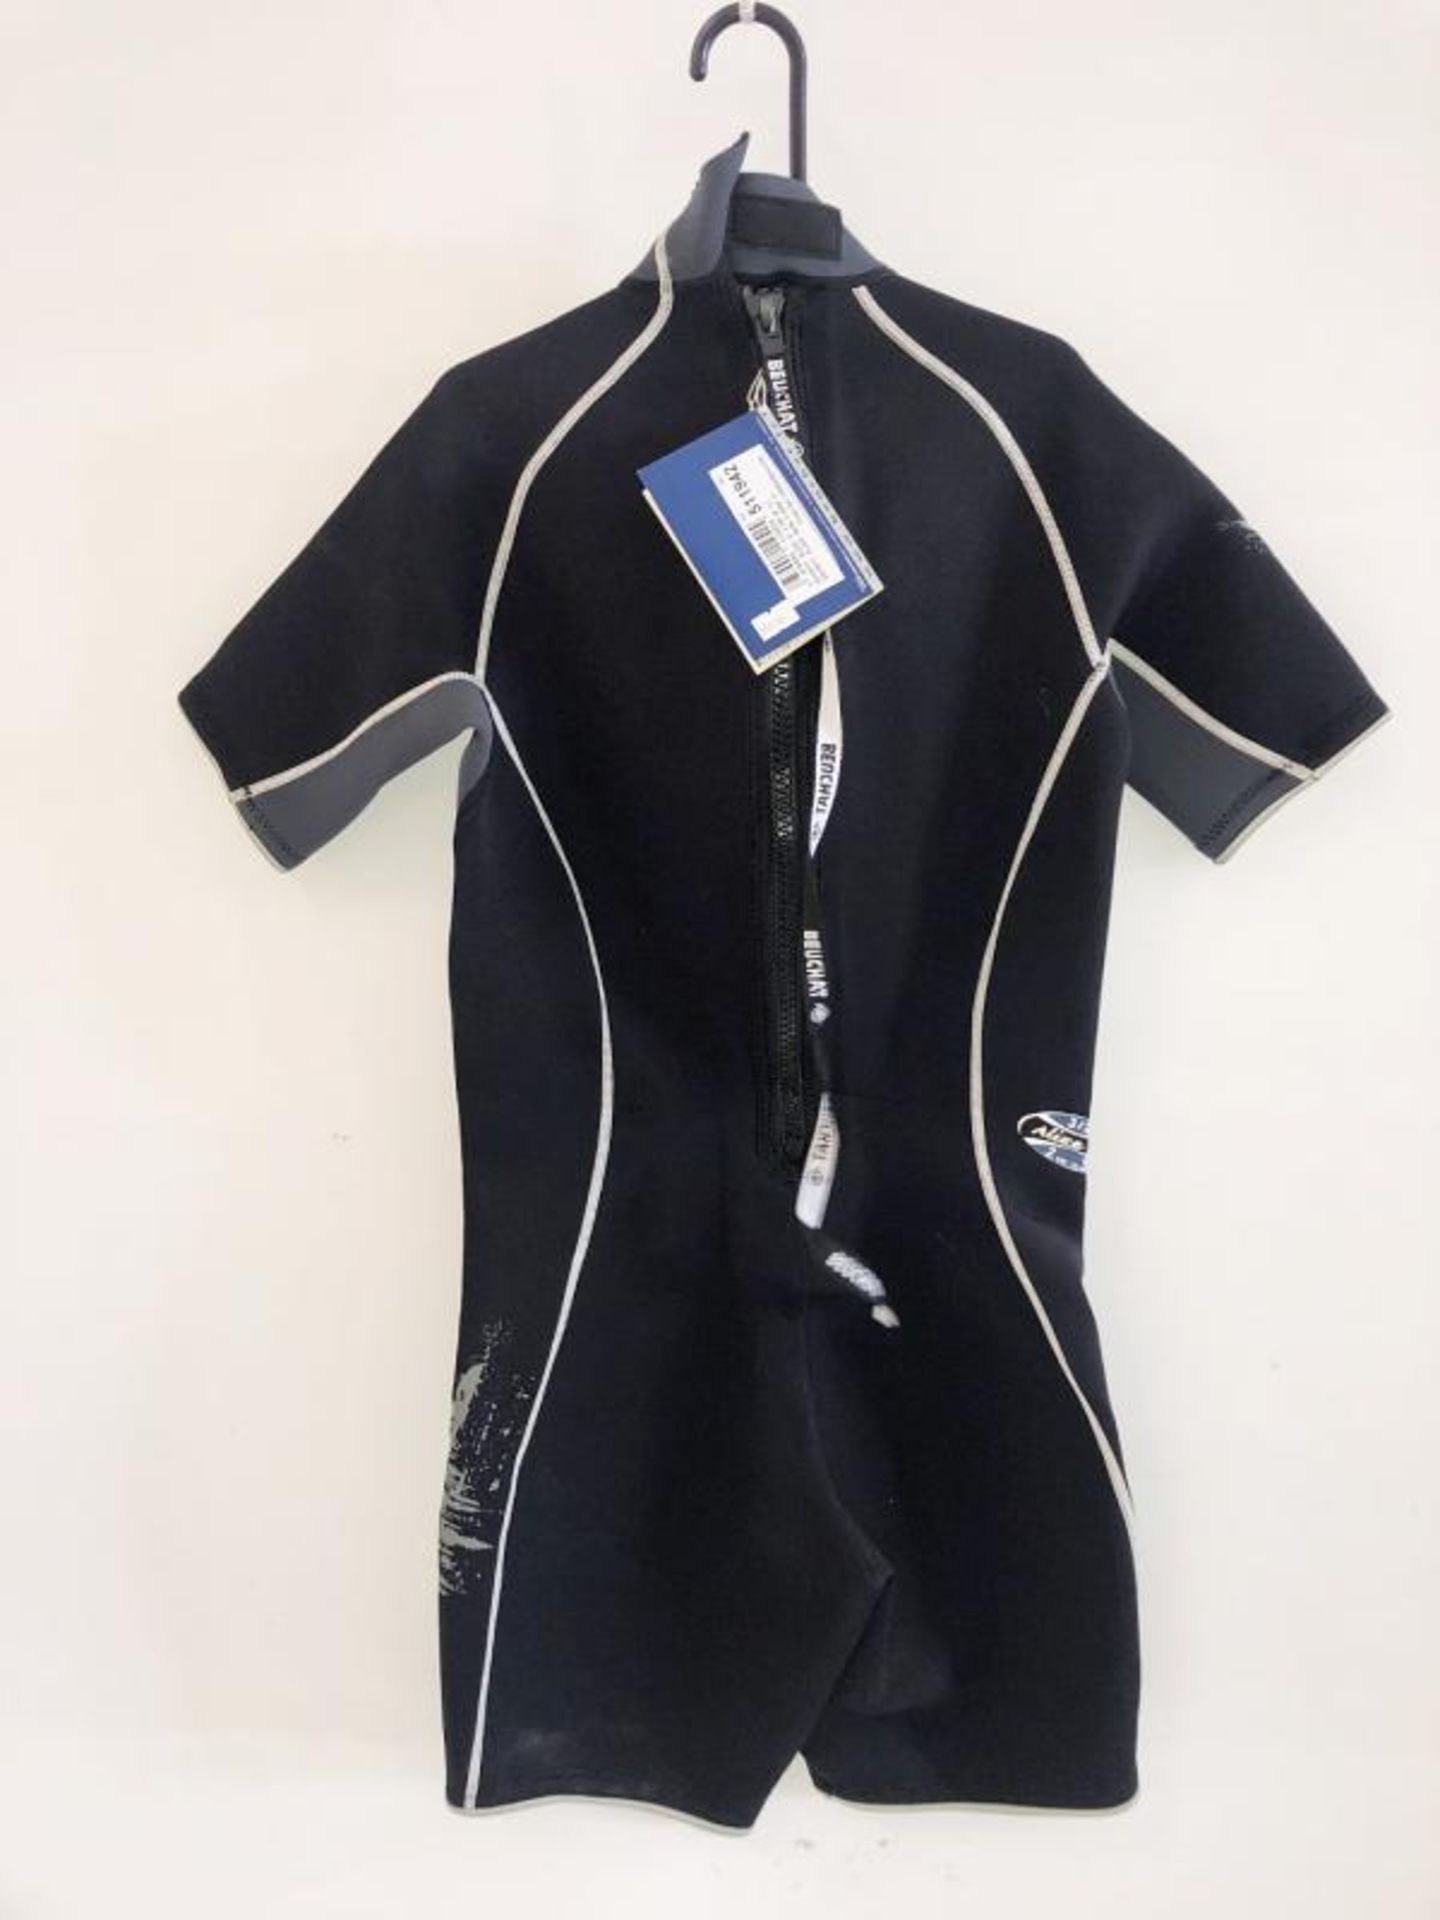 1 x New Beuchat Shorty Wetsuit Size Small - Ref: NS470 - CL349 - Location: Altrincham WA14 - Image 5 of 5